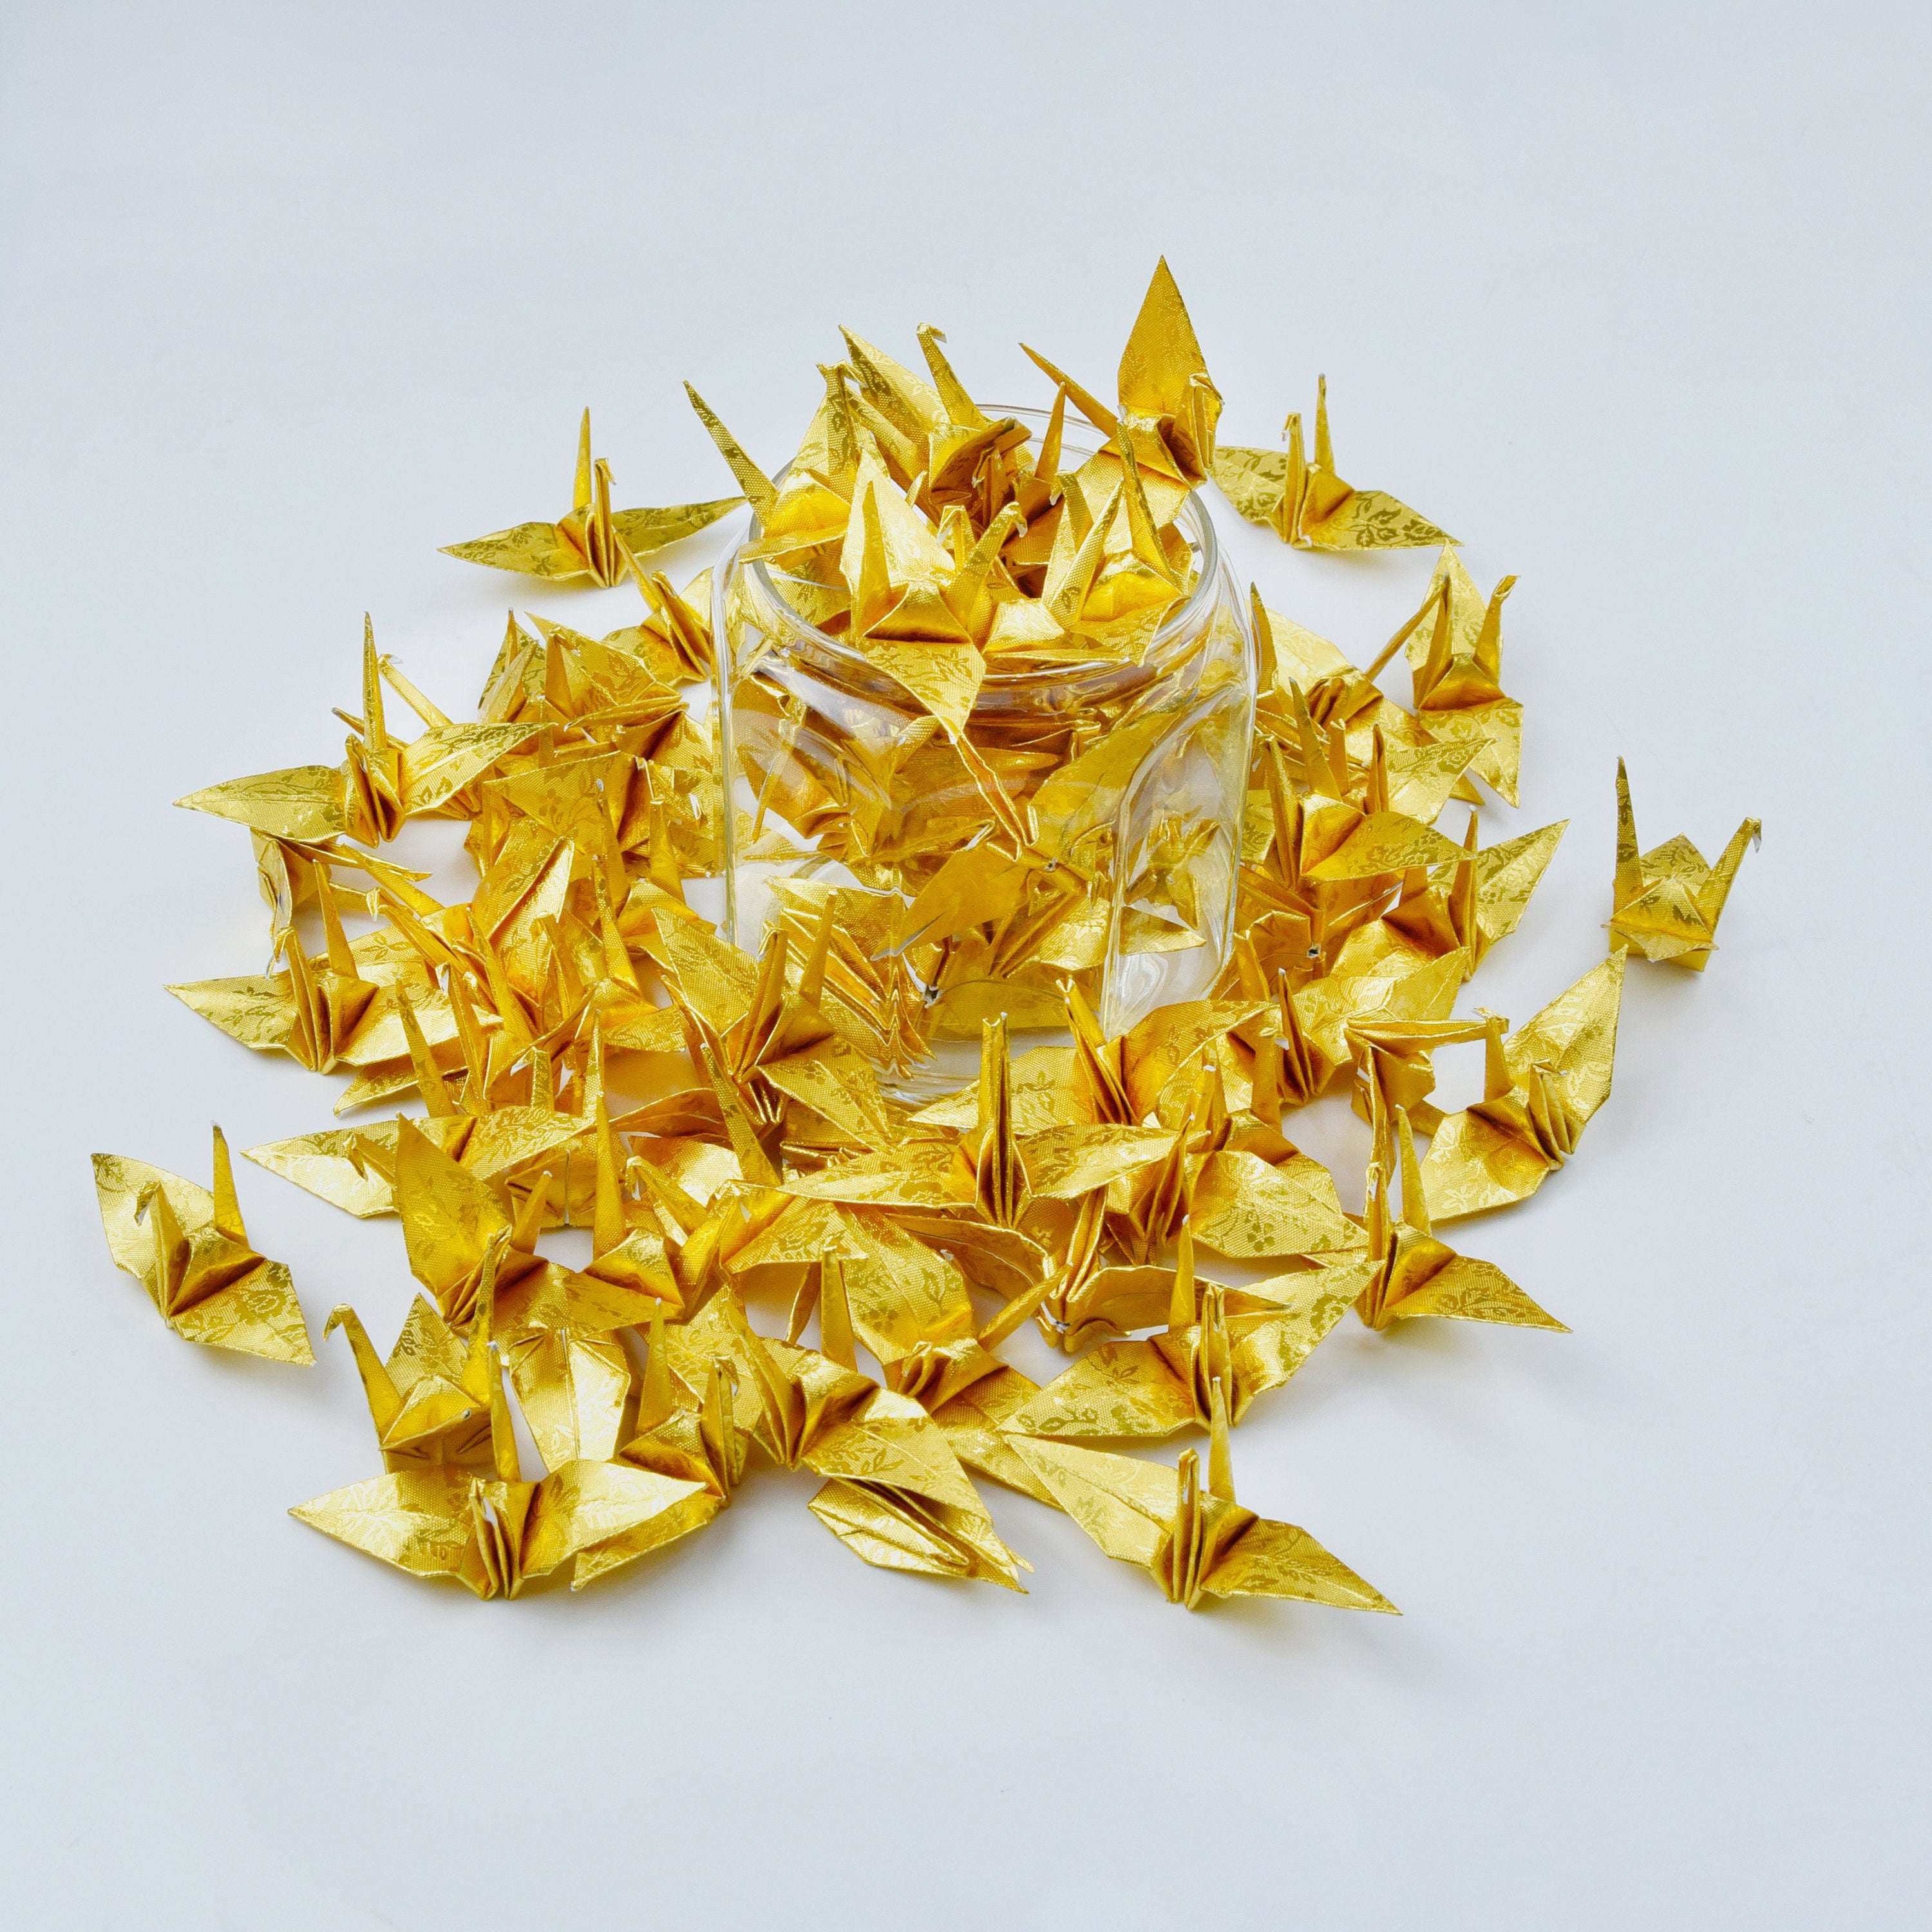 100 Origami Crane Gold with Rose Pattern Made of 7.5 cm (3x3 inch) - for Ornament, Decoration, Wedding